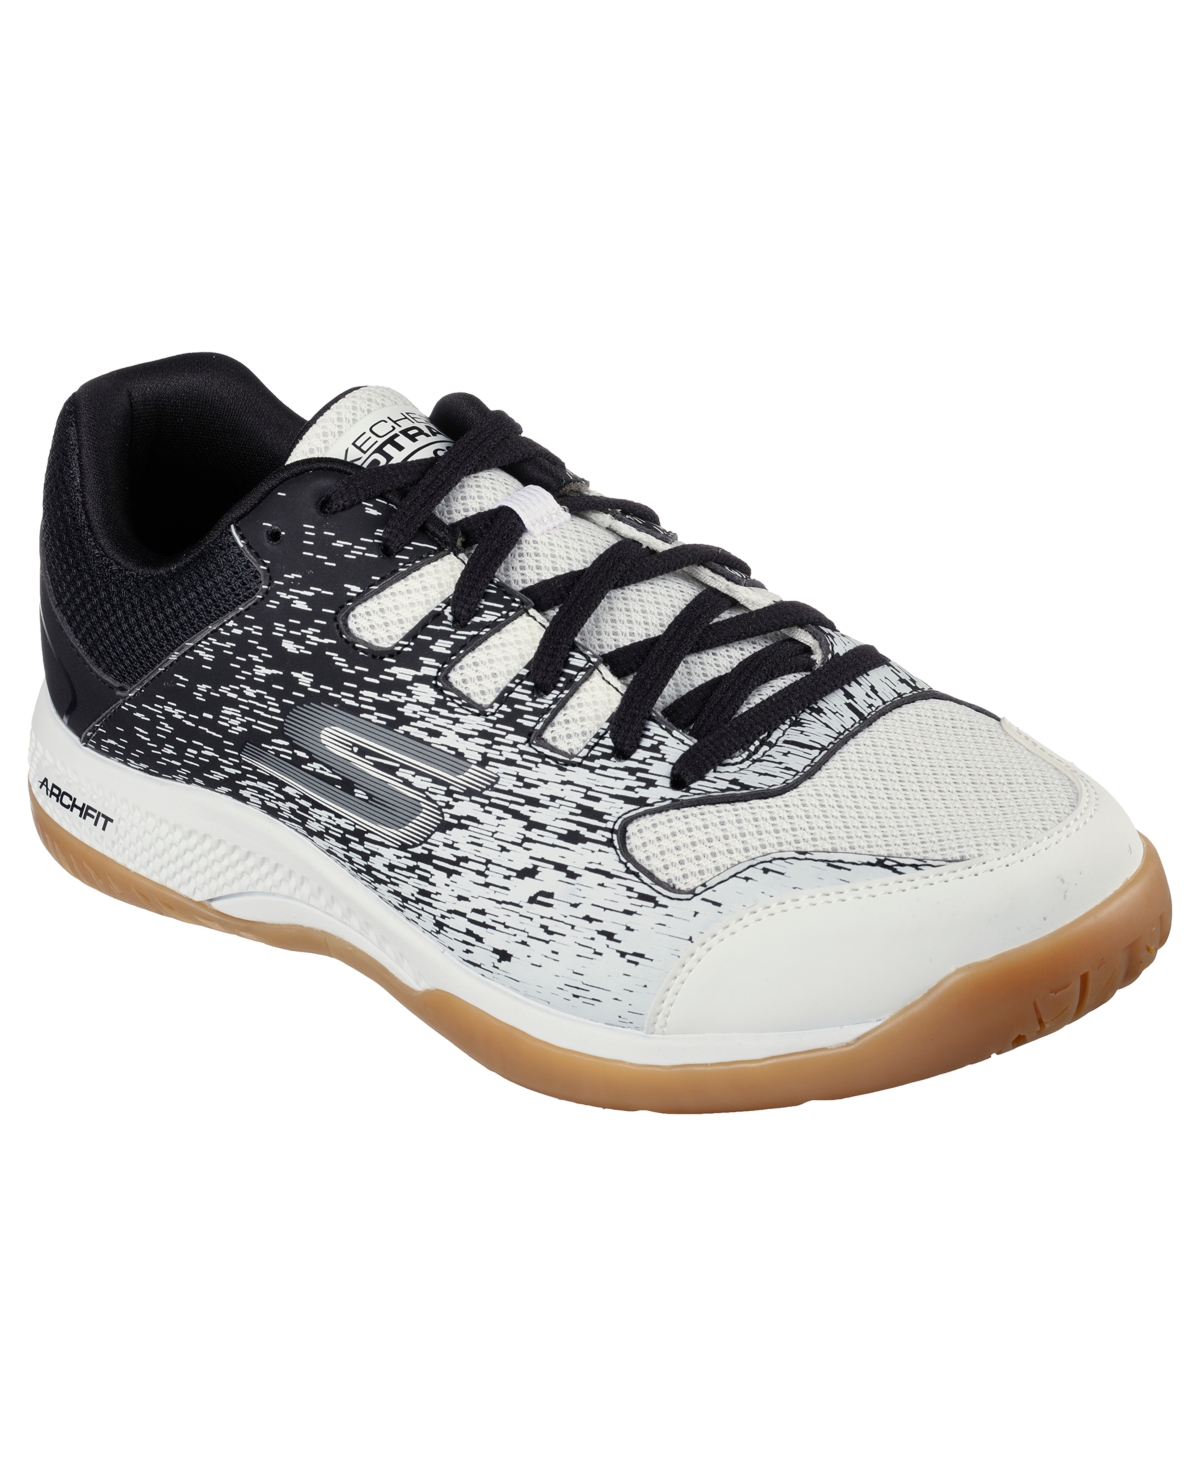 Skechers Men #39 s Relaxed Fit Arch Fit Viper Court Pickleball Shoes